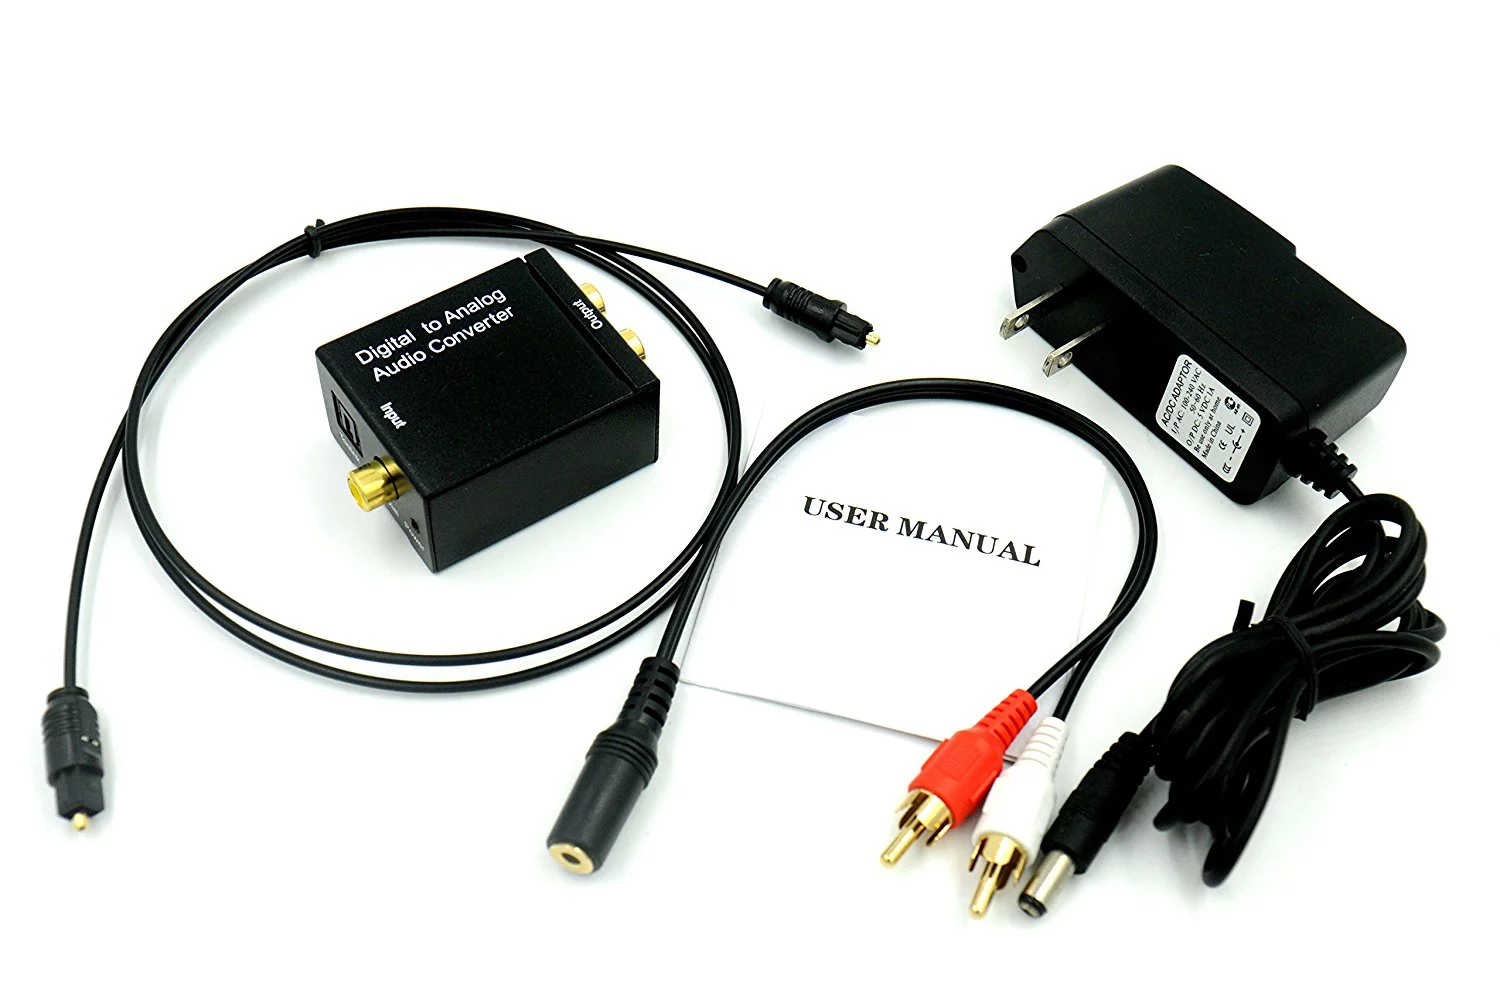 What Is A Digital Adapter